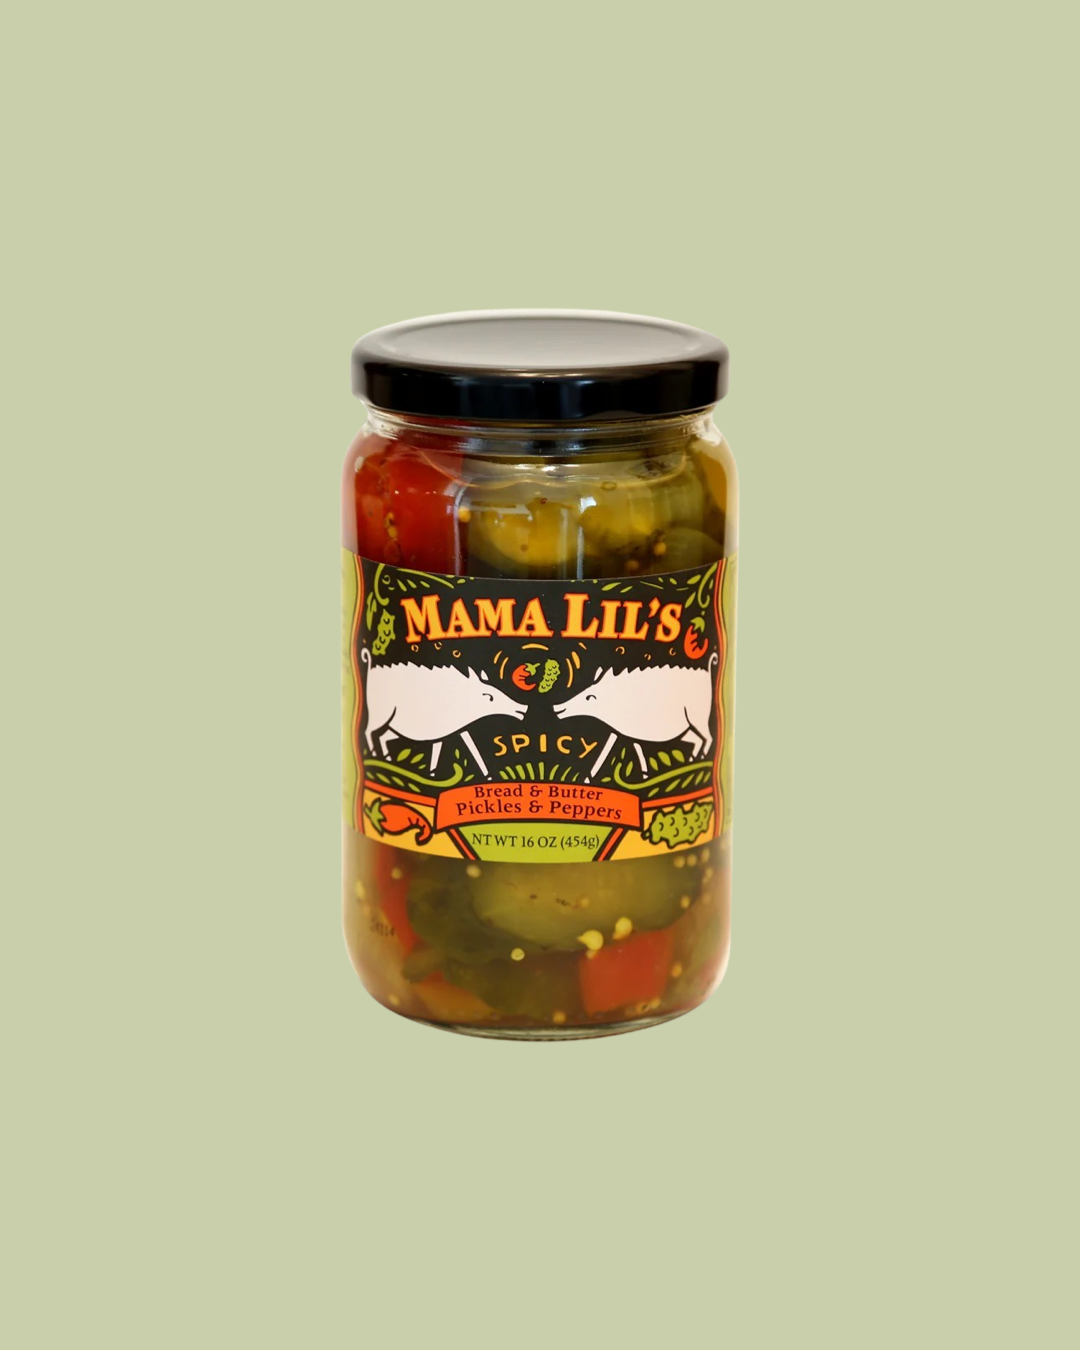 Spicy Bread & Butter Pickles & Peppers